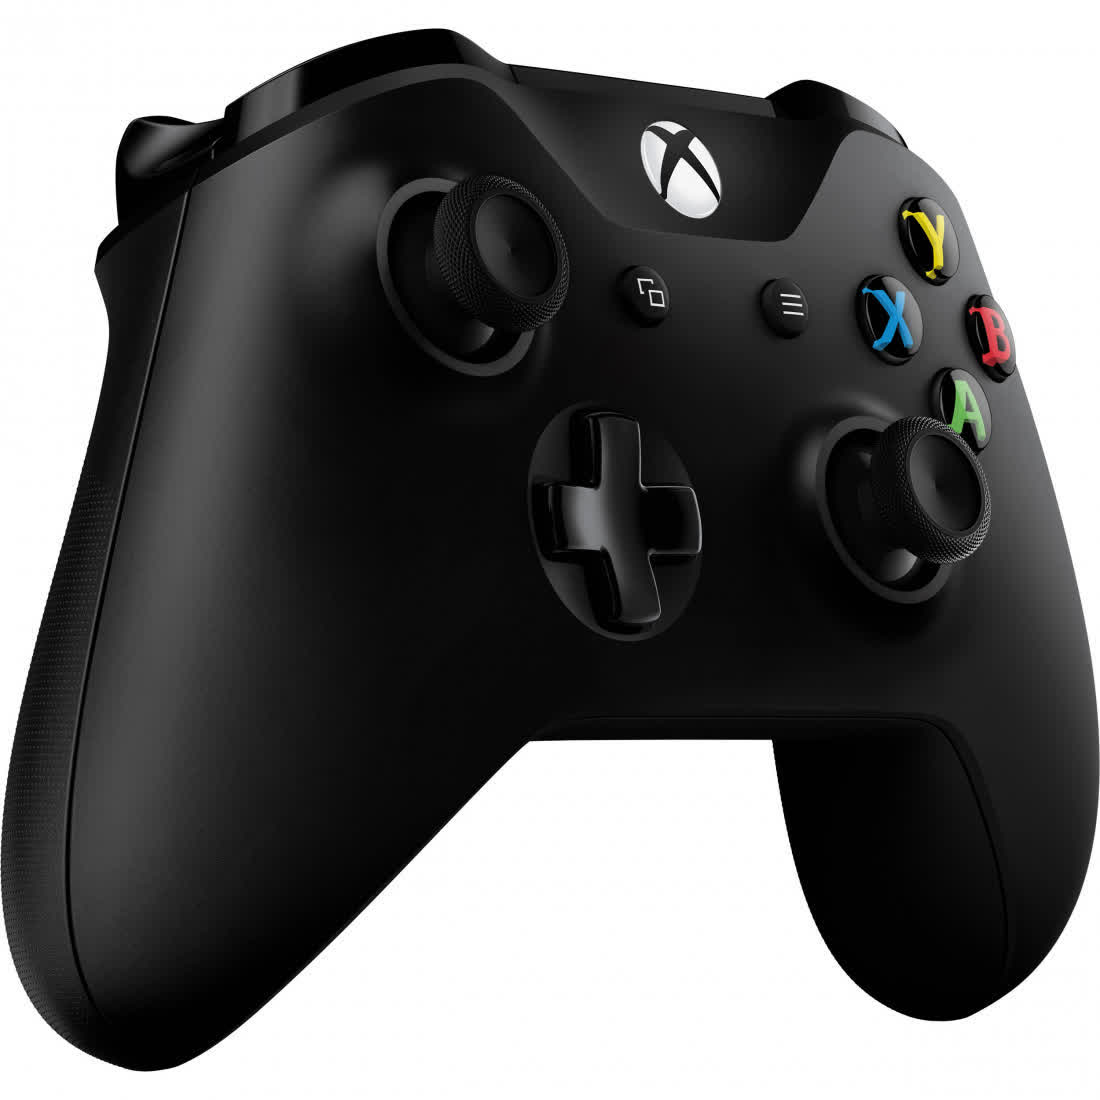 napkin envy layer Microsoft Xbox One Wireless Controller Reviews, Pros and Cons | TechSpot